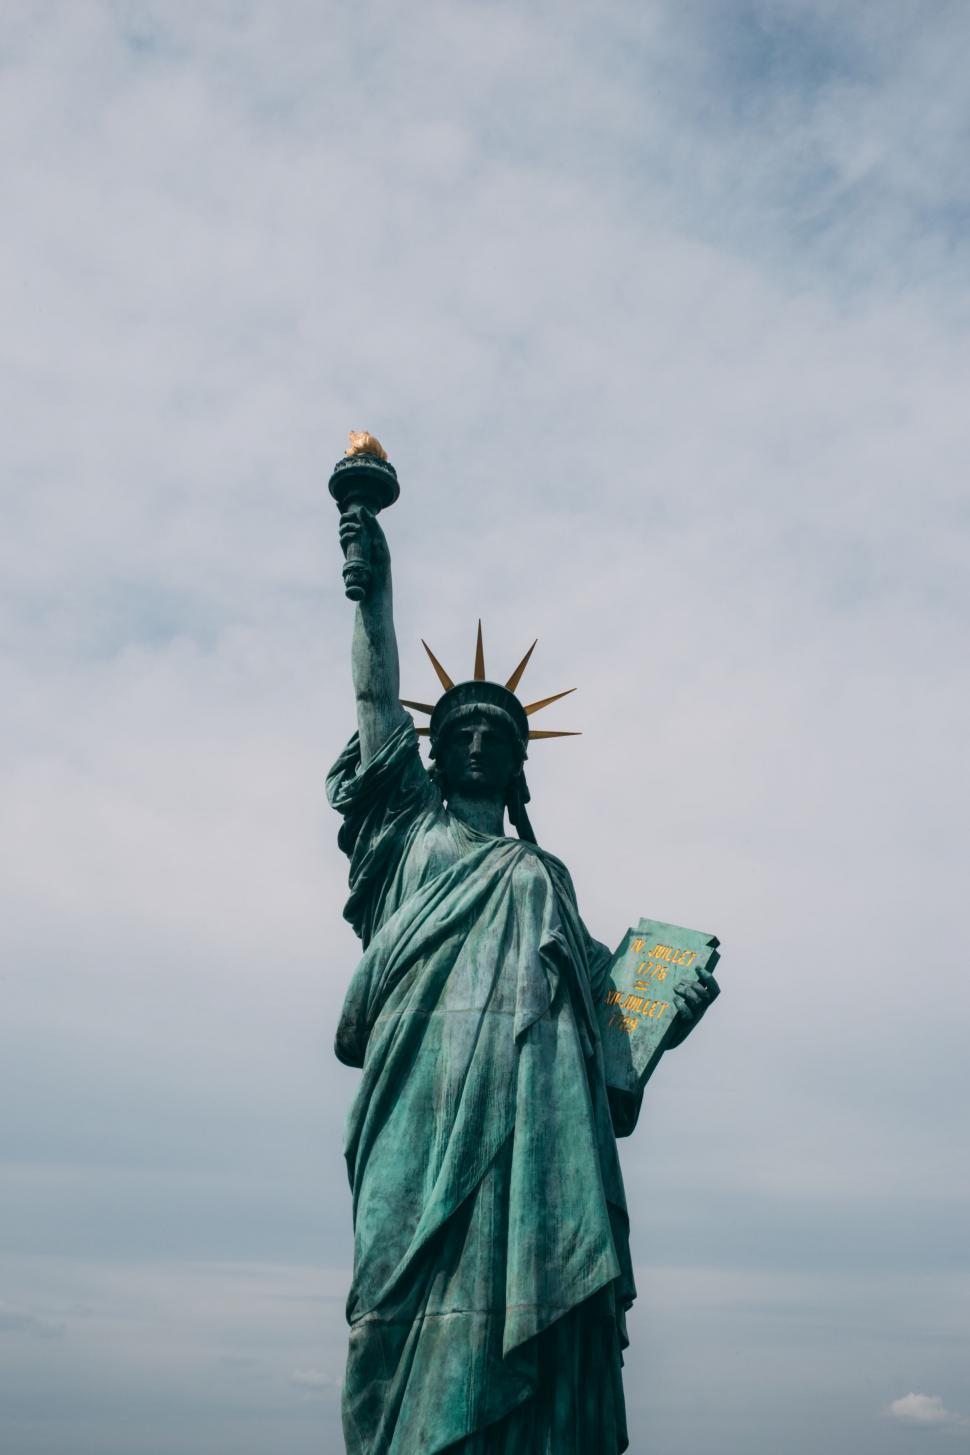 Free Image of Statue of Liberty Holding Map 